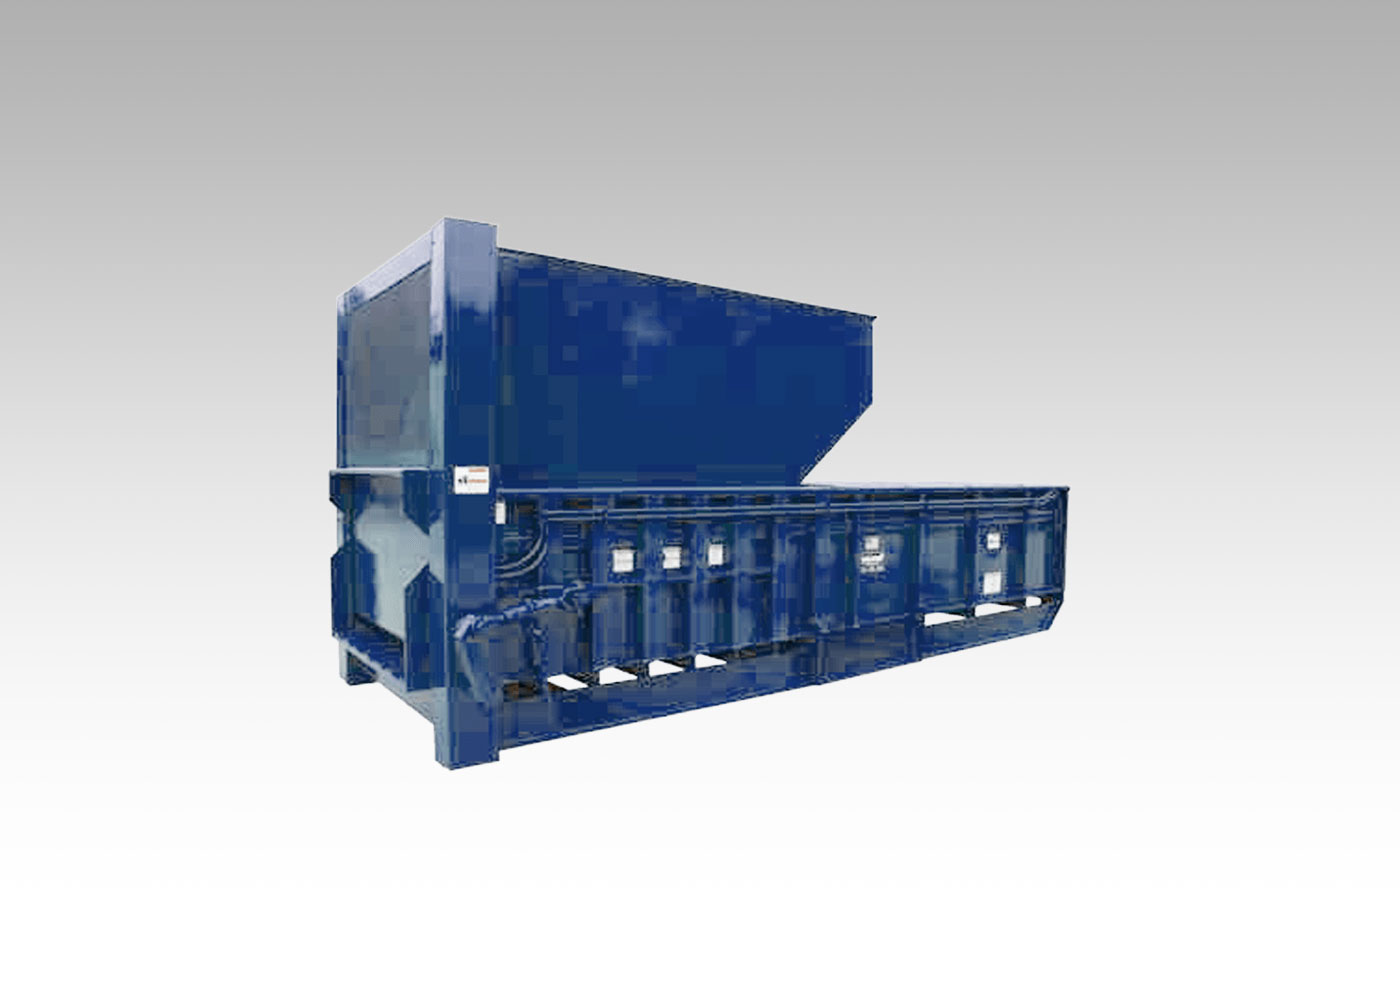 Trash compactor precrushers that crush material before compactor for higher compaction rates